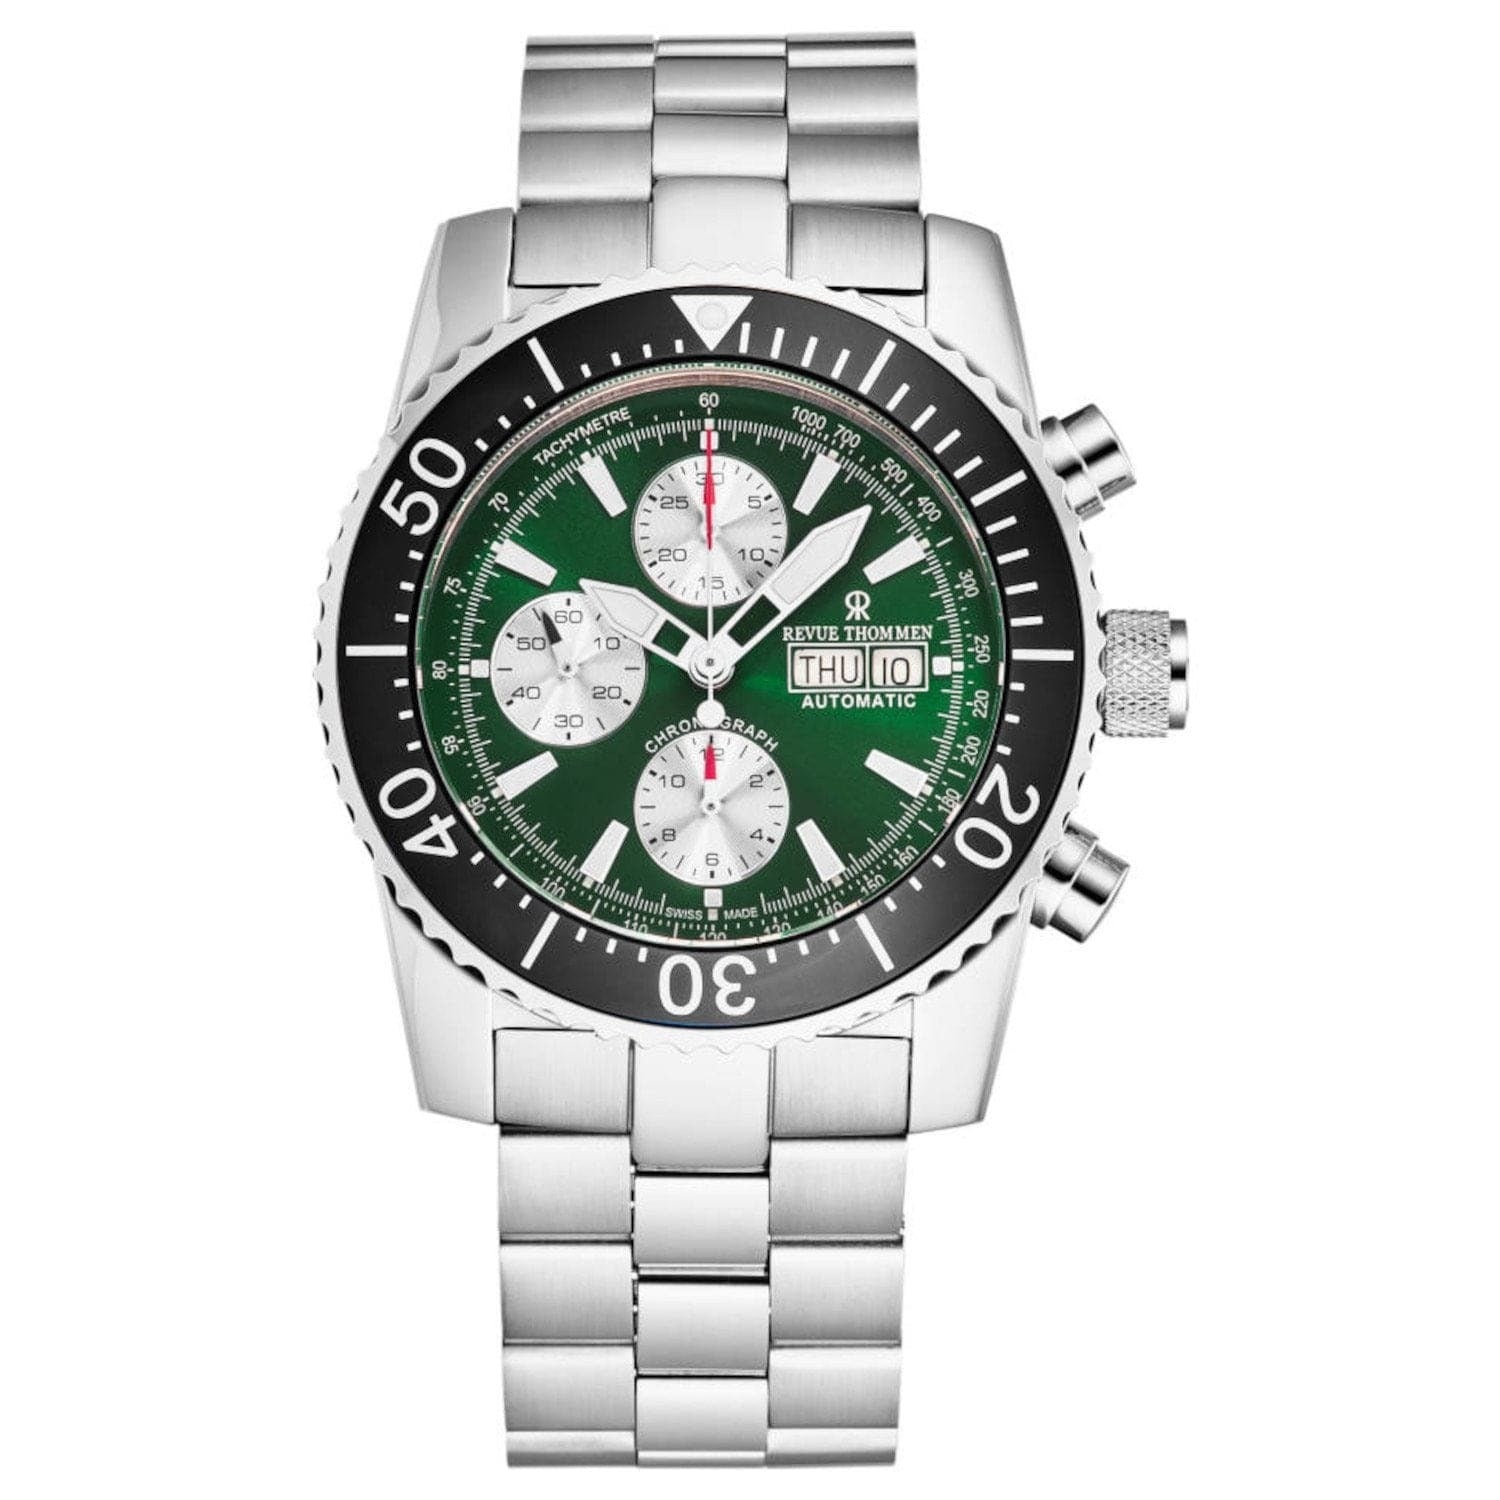 A Revue Thommen 17030.6121 Men's 'Divers' Green Dial Day-Date Chronograph Automatic Watch, featuring the keywords "Revue Thommen".